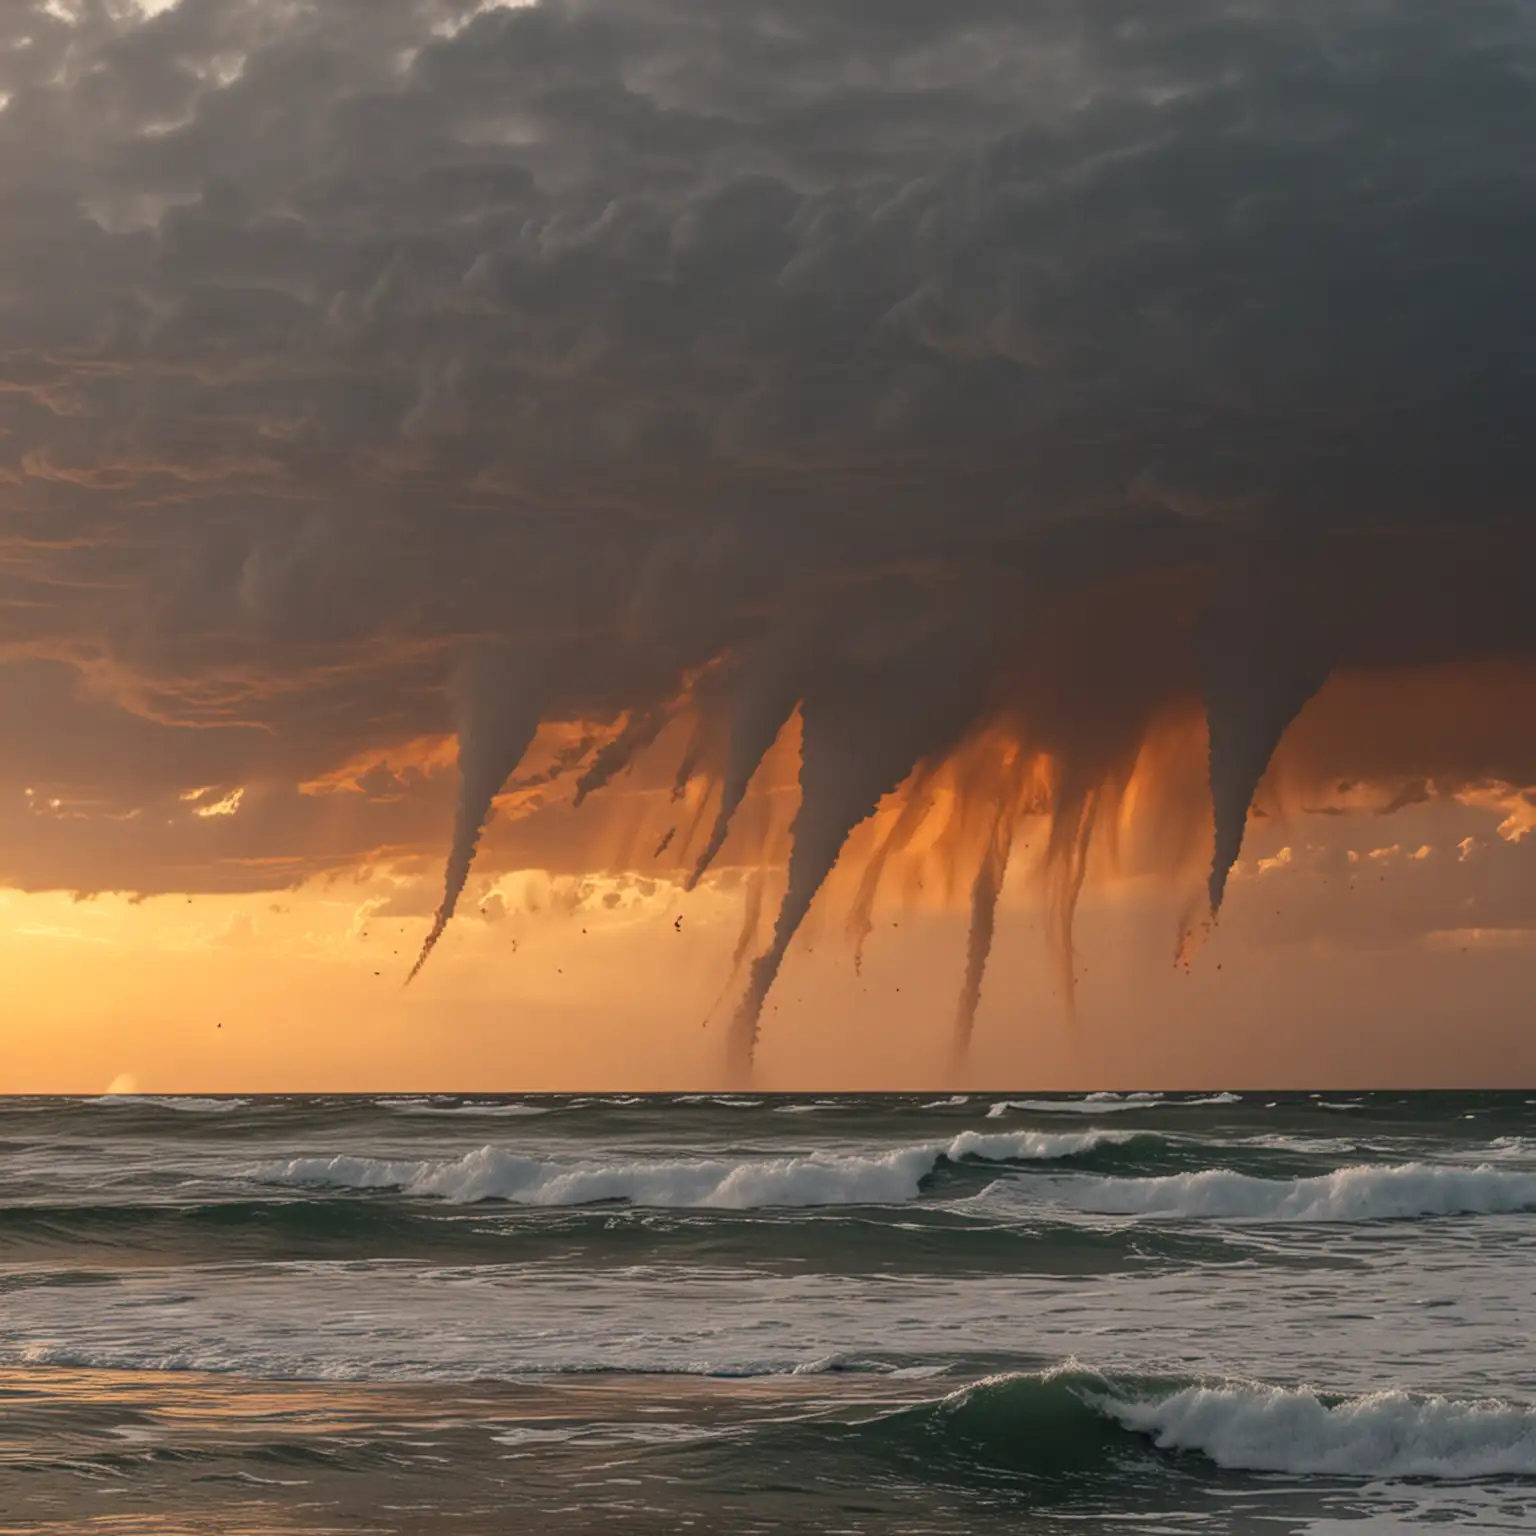 Vibrant Orange Tornadoes Dancing in Sunset Reflections Over the Ocean